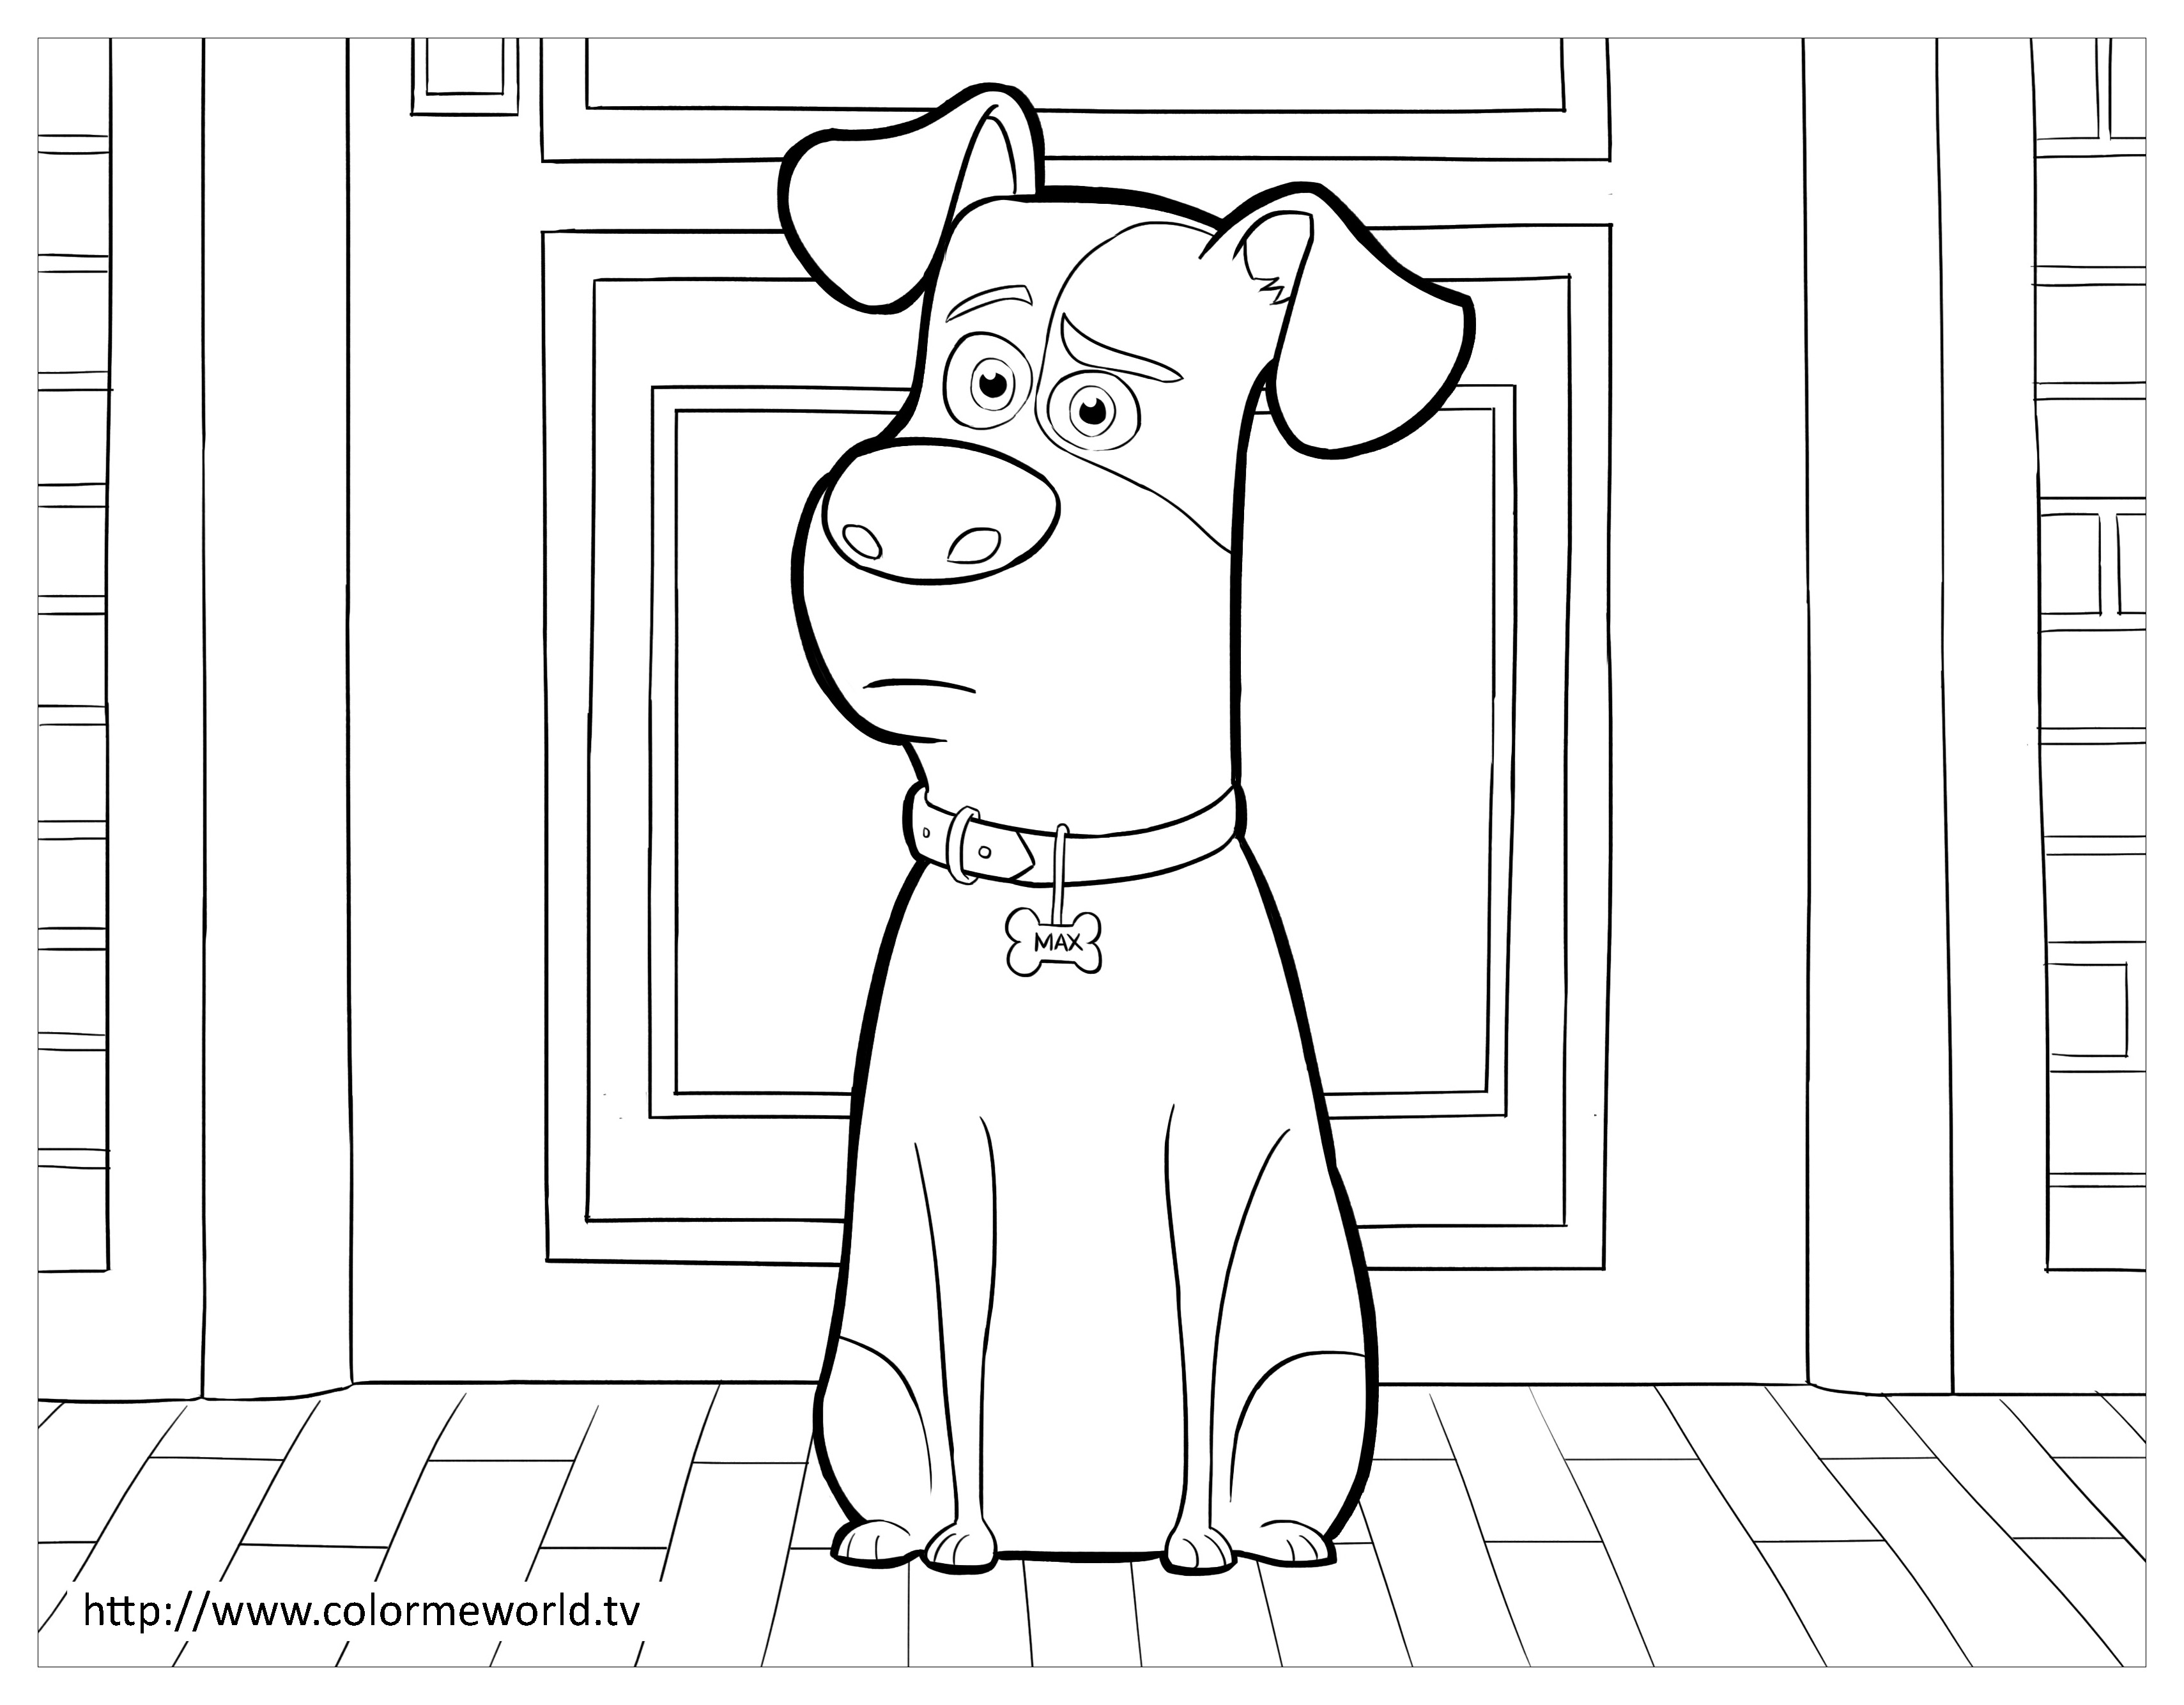 The Secret Life of Pets coloring page to download